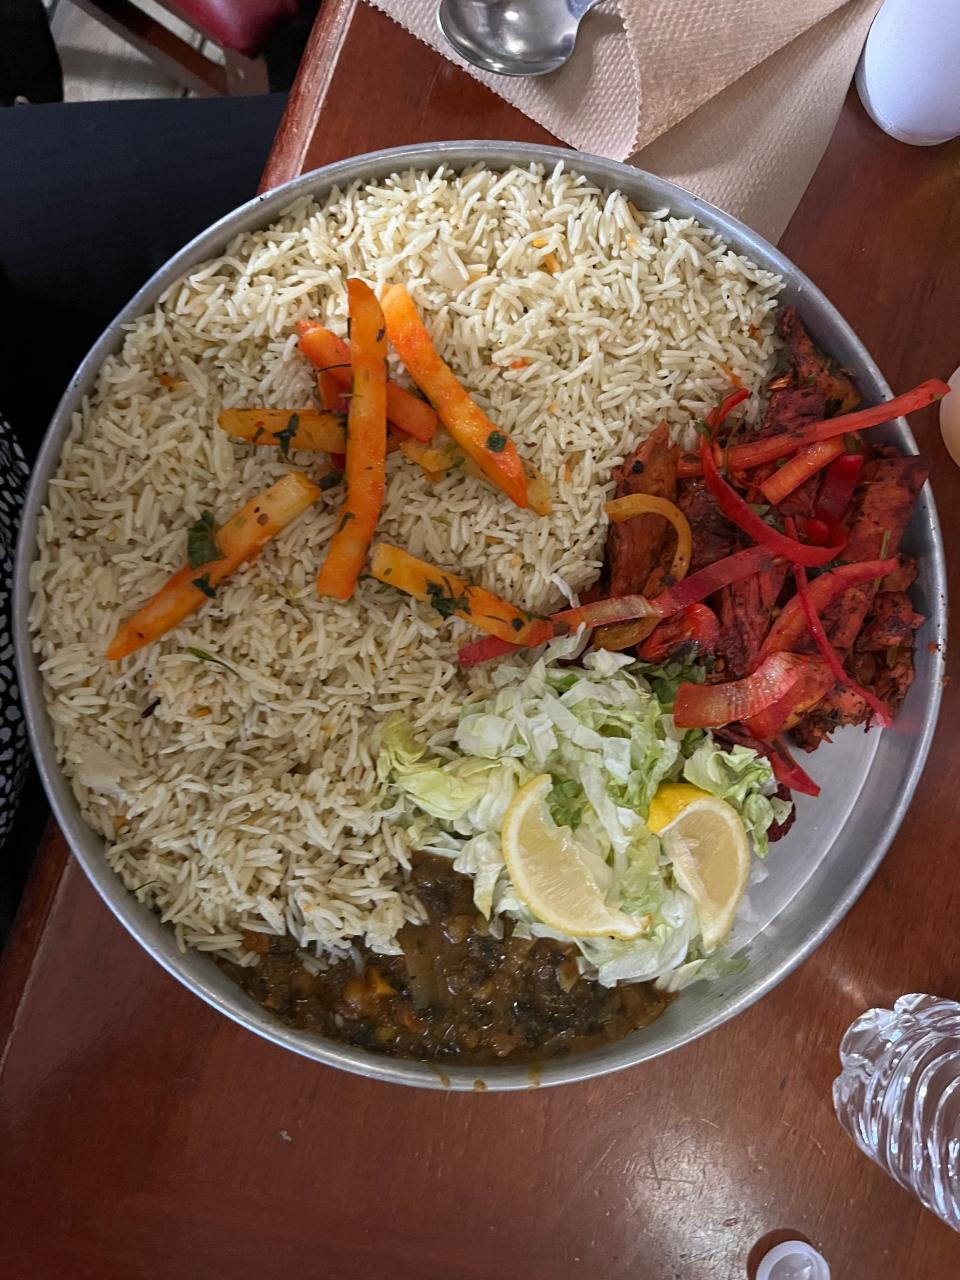 A chicken and rice dish from African Paradise West.